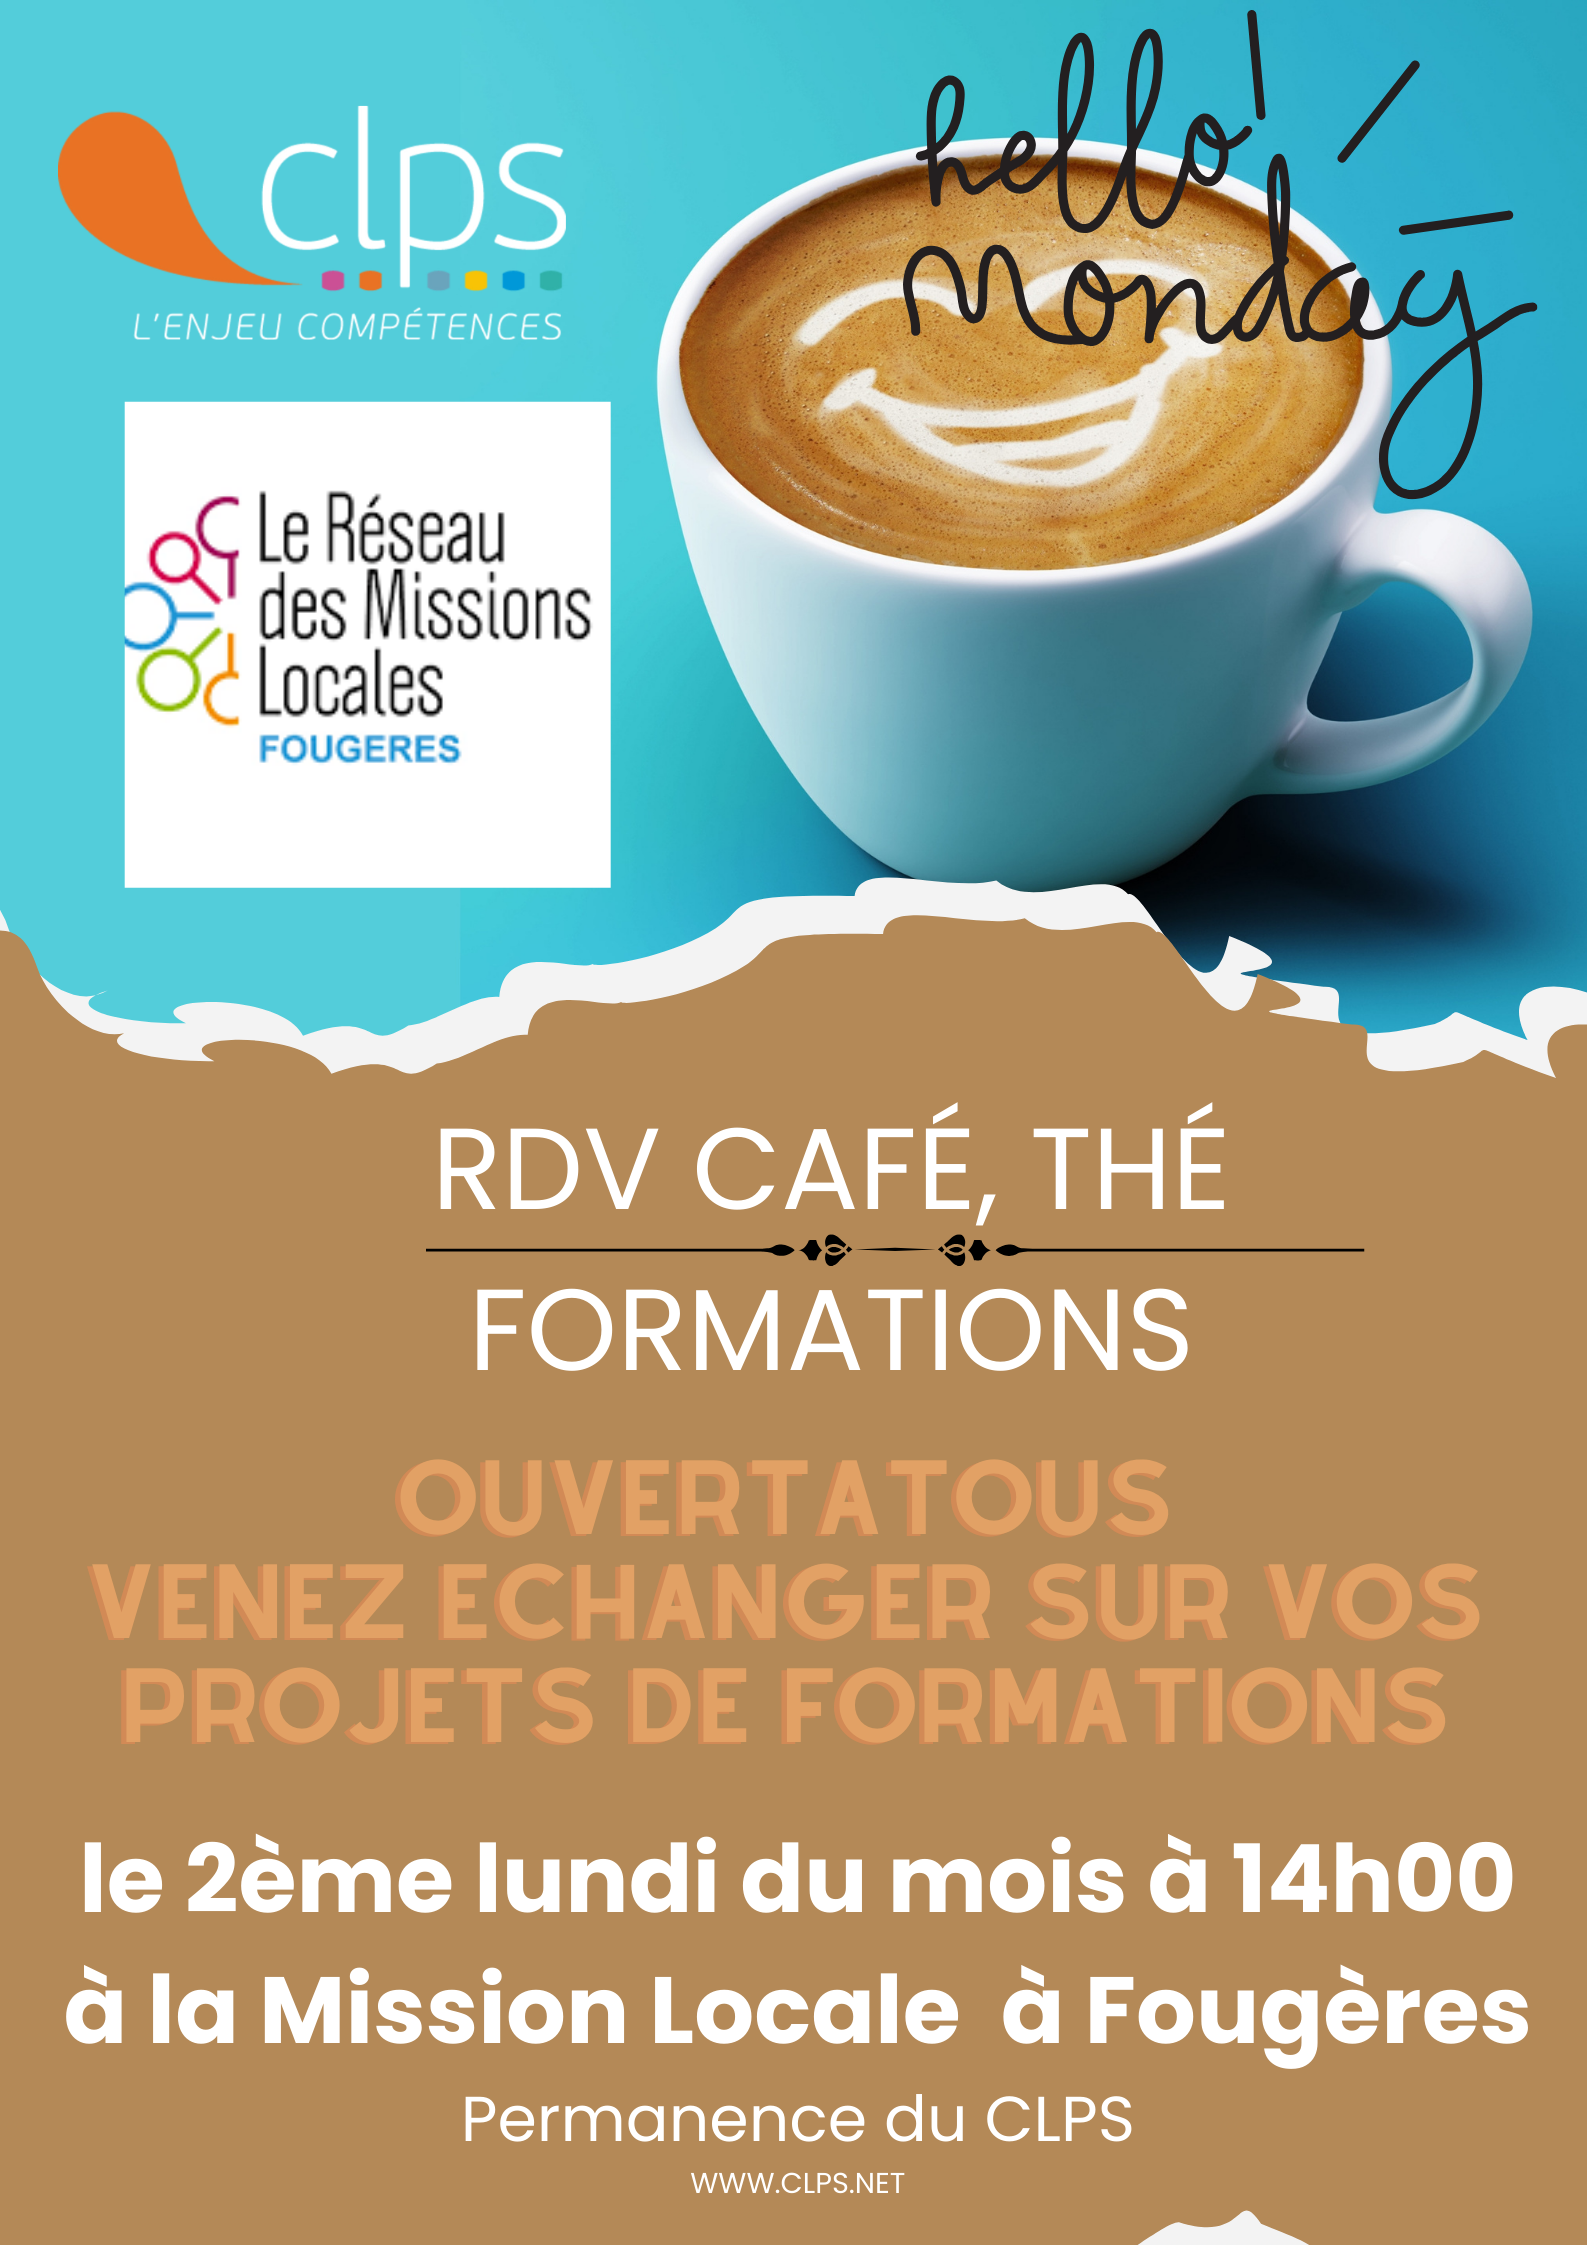 AFFICHE CAFE THE FORMATION Mission Locale clps FOUGERES